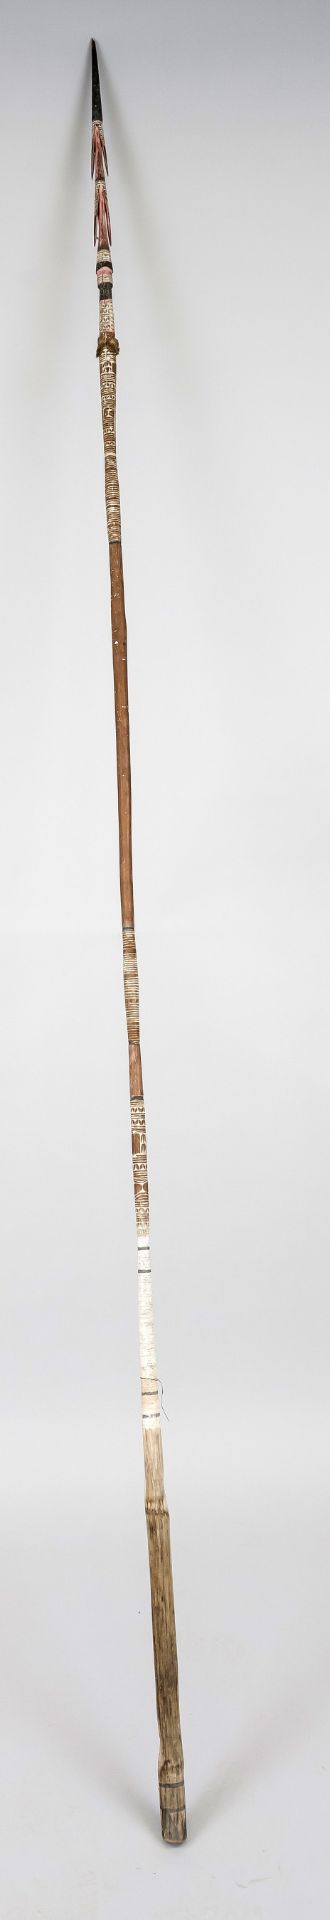 Javelin, probably Borneo 19th century. Wood, carved and painted. Tip with two barbs, otherwise